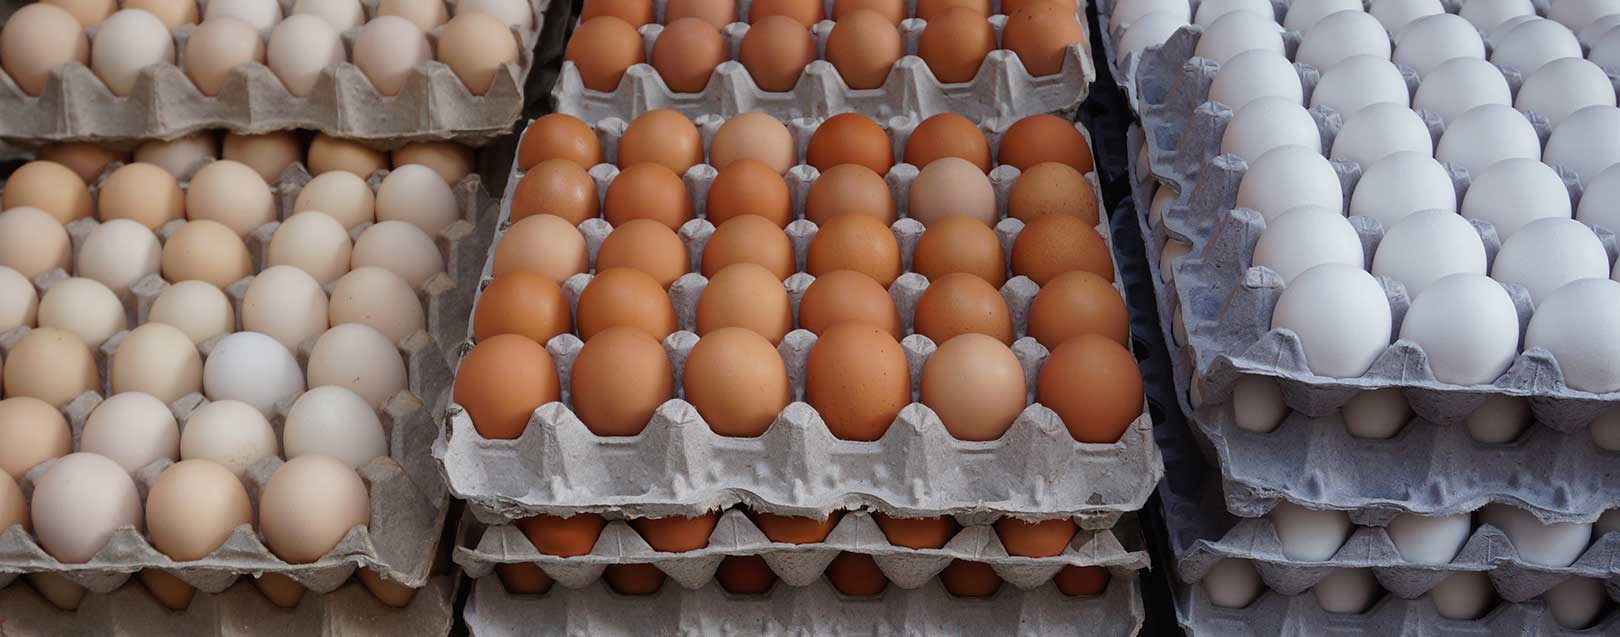 Livestock farmers urge Govt to take measures to resume egg exports to Qatar